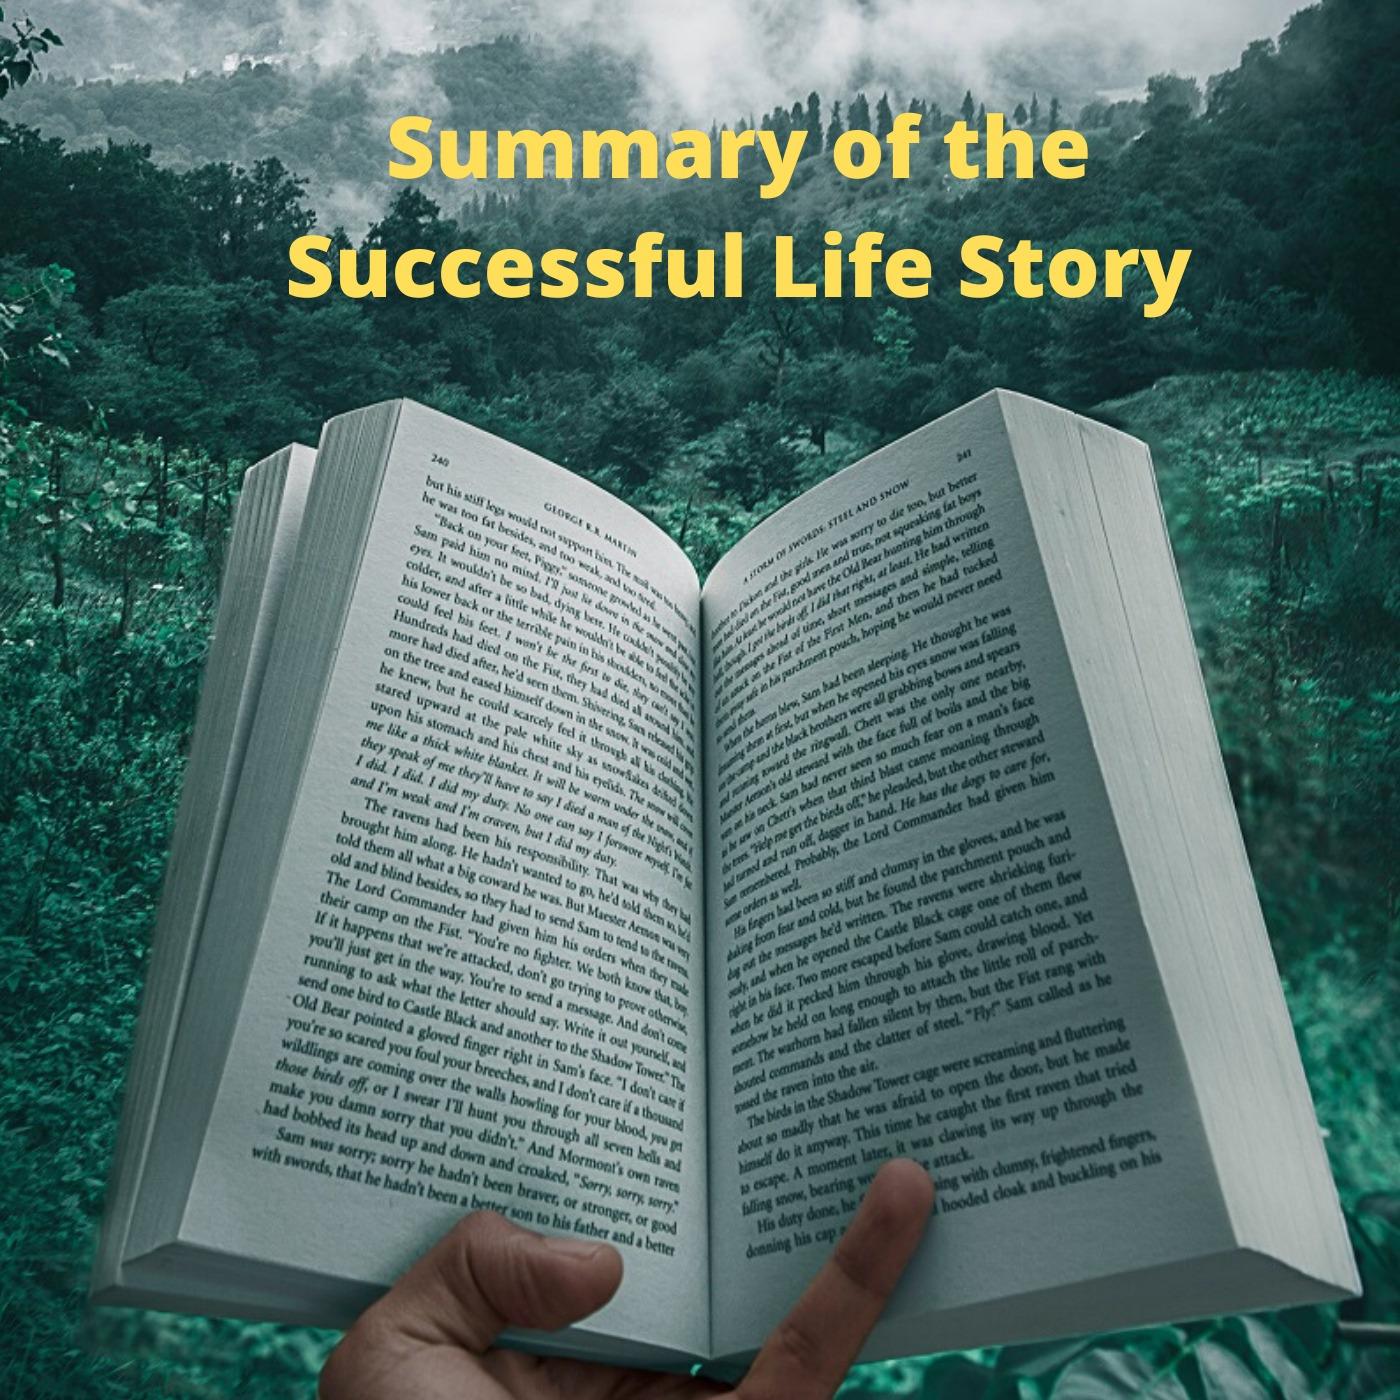 Summary of the Successful Life Story